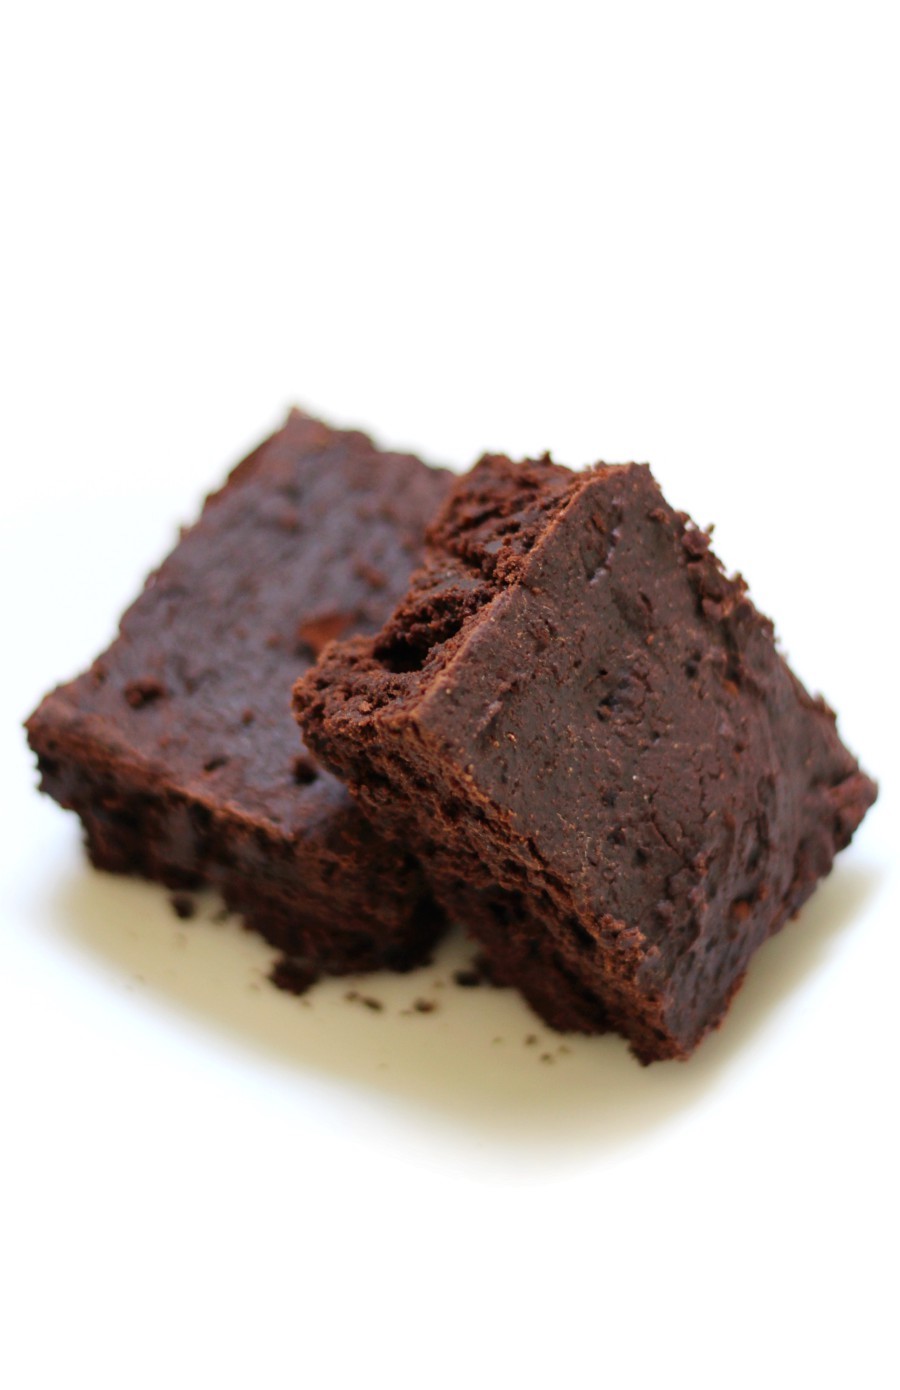 Easy Thick & Fudgy One-Bowl Gluten-Free Vegan Brownies (Allergy-Free) A quick & easy recipe for classic Thick & Fudgy One-Bowl Gluten-Free Vegan Brownies! A top 8 allergy-free, oil-free, and sugar-free swap for your favorite rich and decadent chocolate dessert! Kid and mom approved for any party or celebration! 